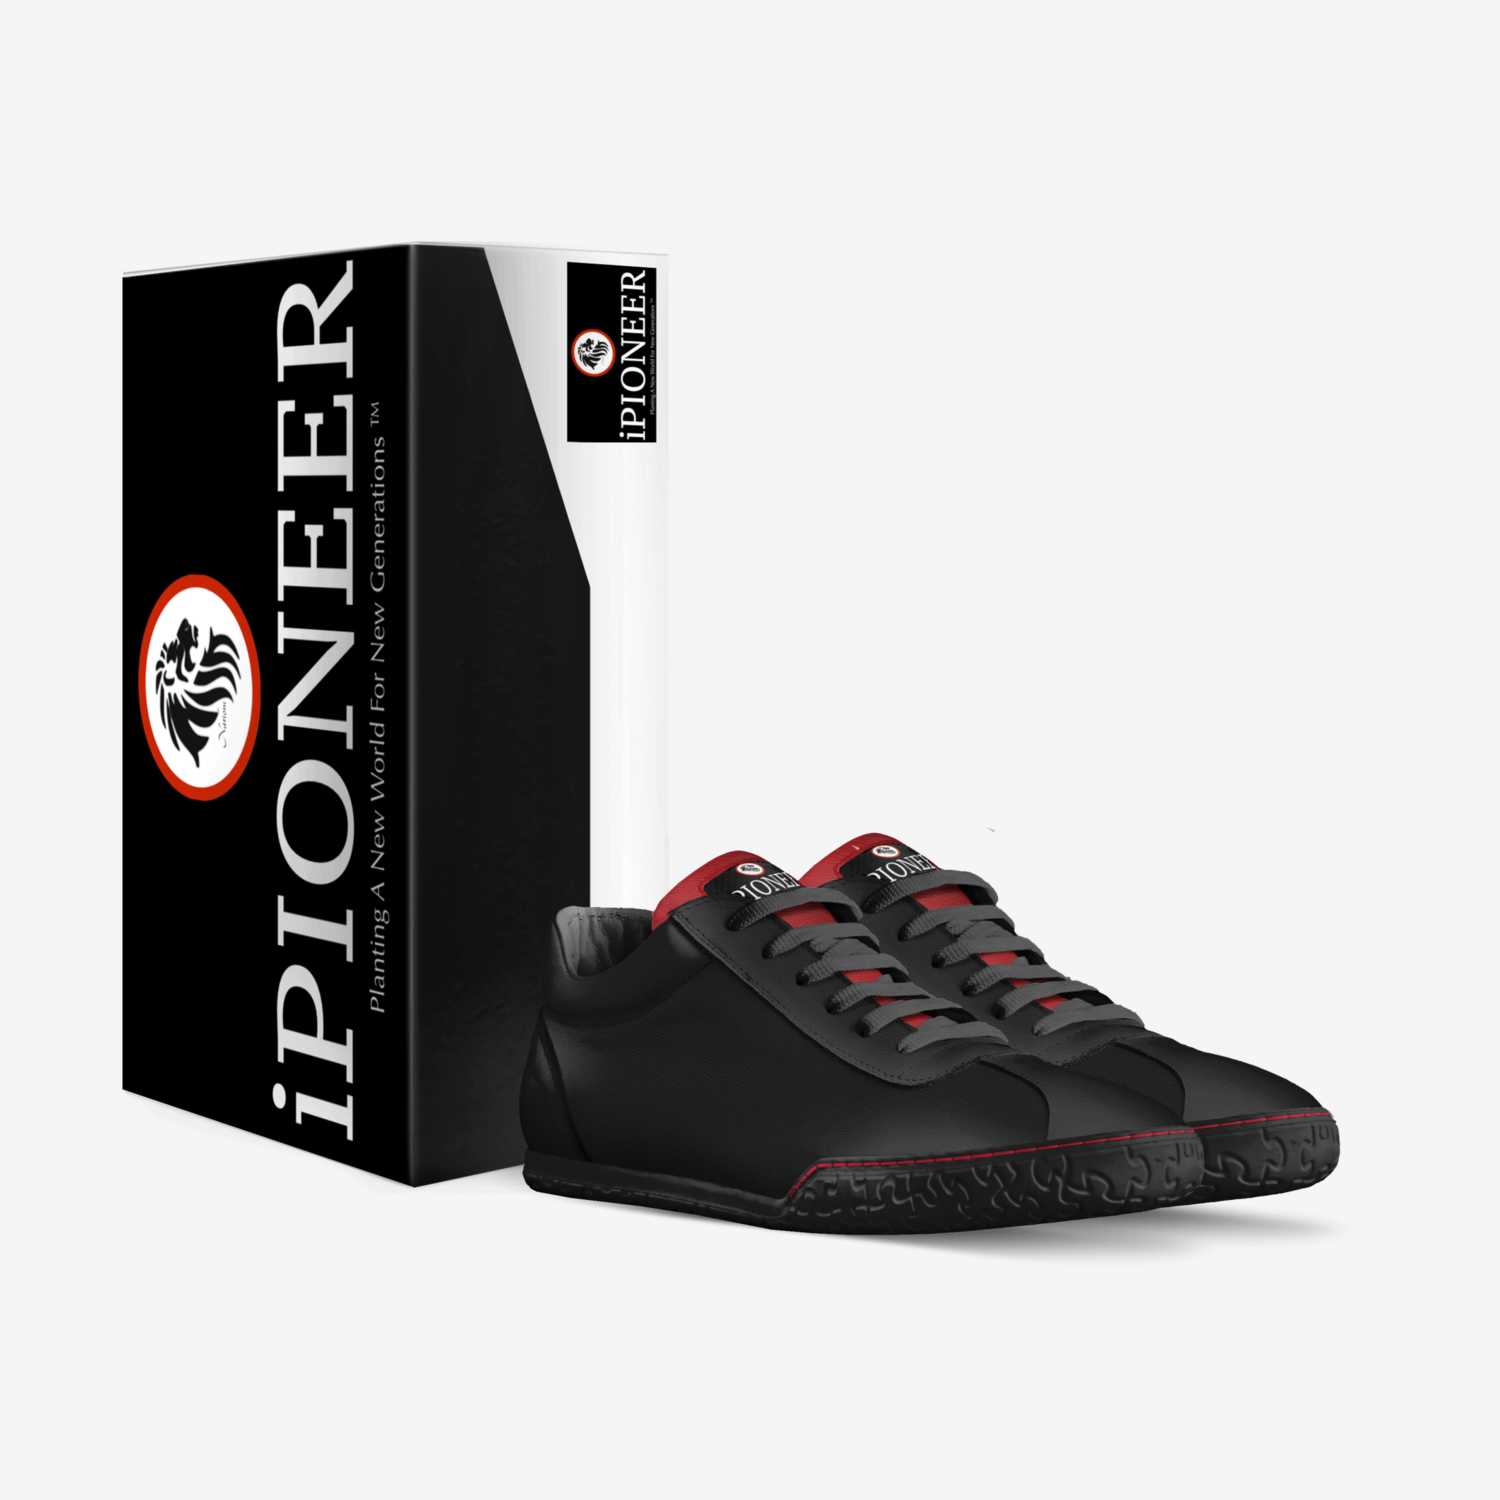 iPioneer custom made in Italy shoes by Marlon D. Hester Sr. | Box view